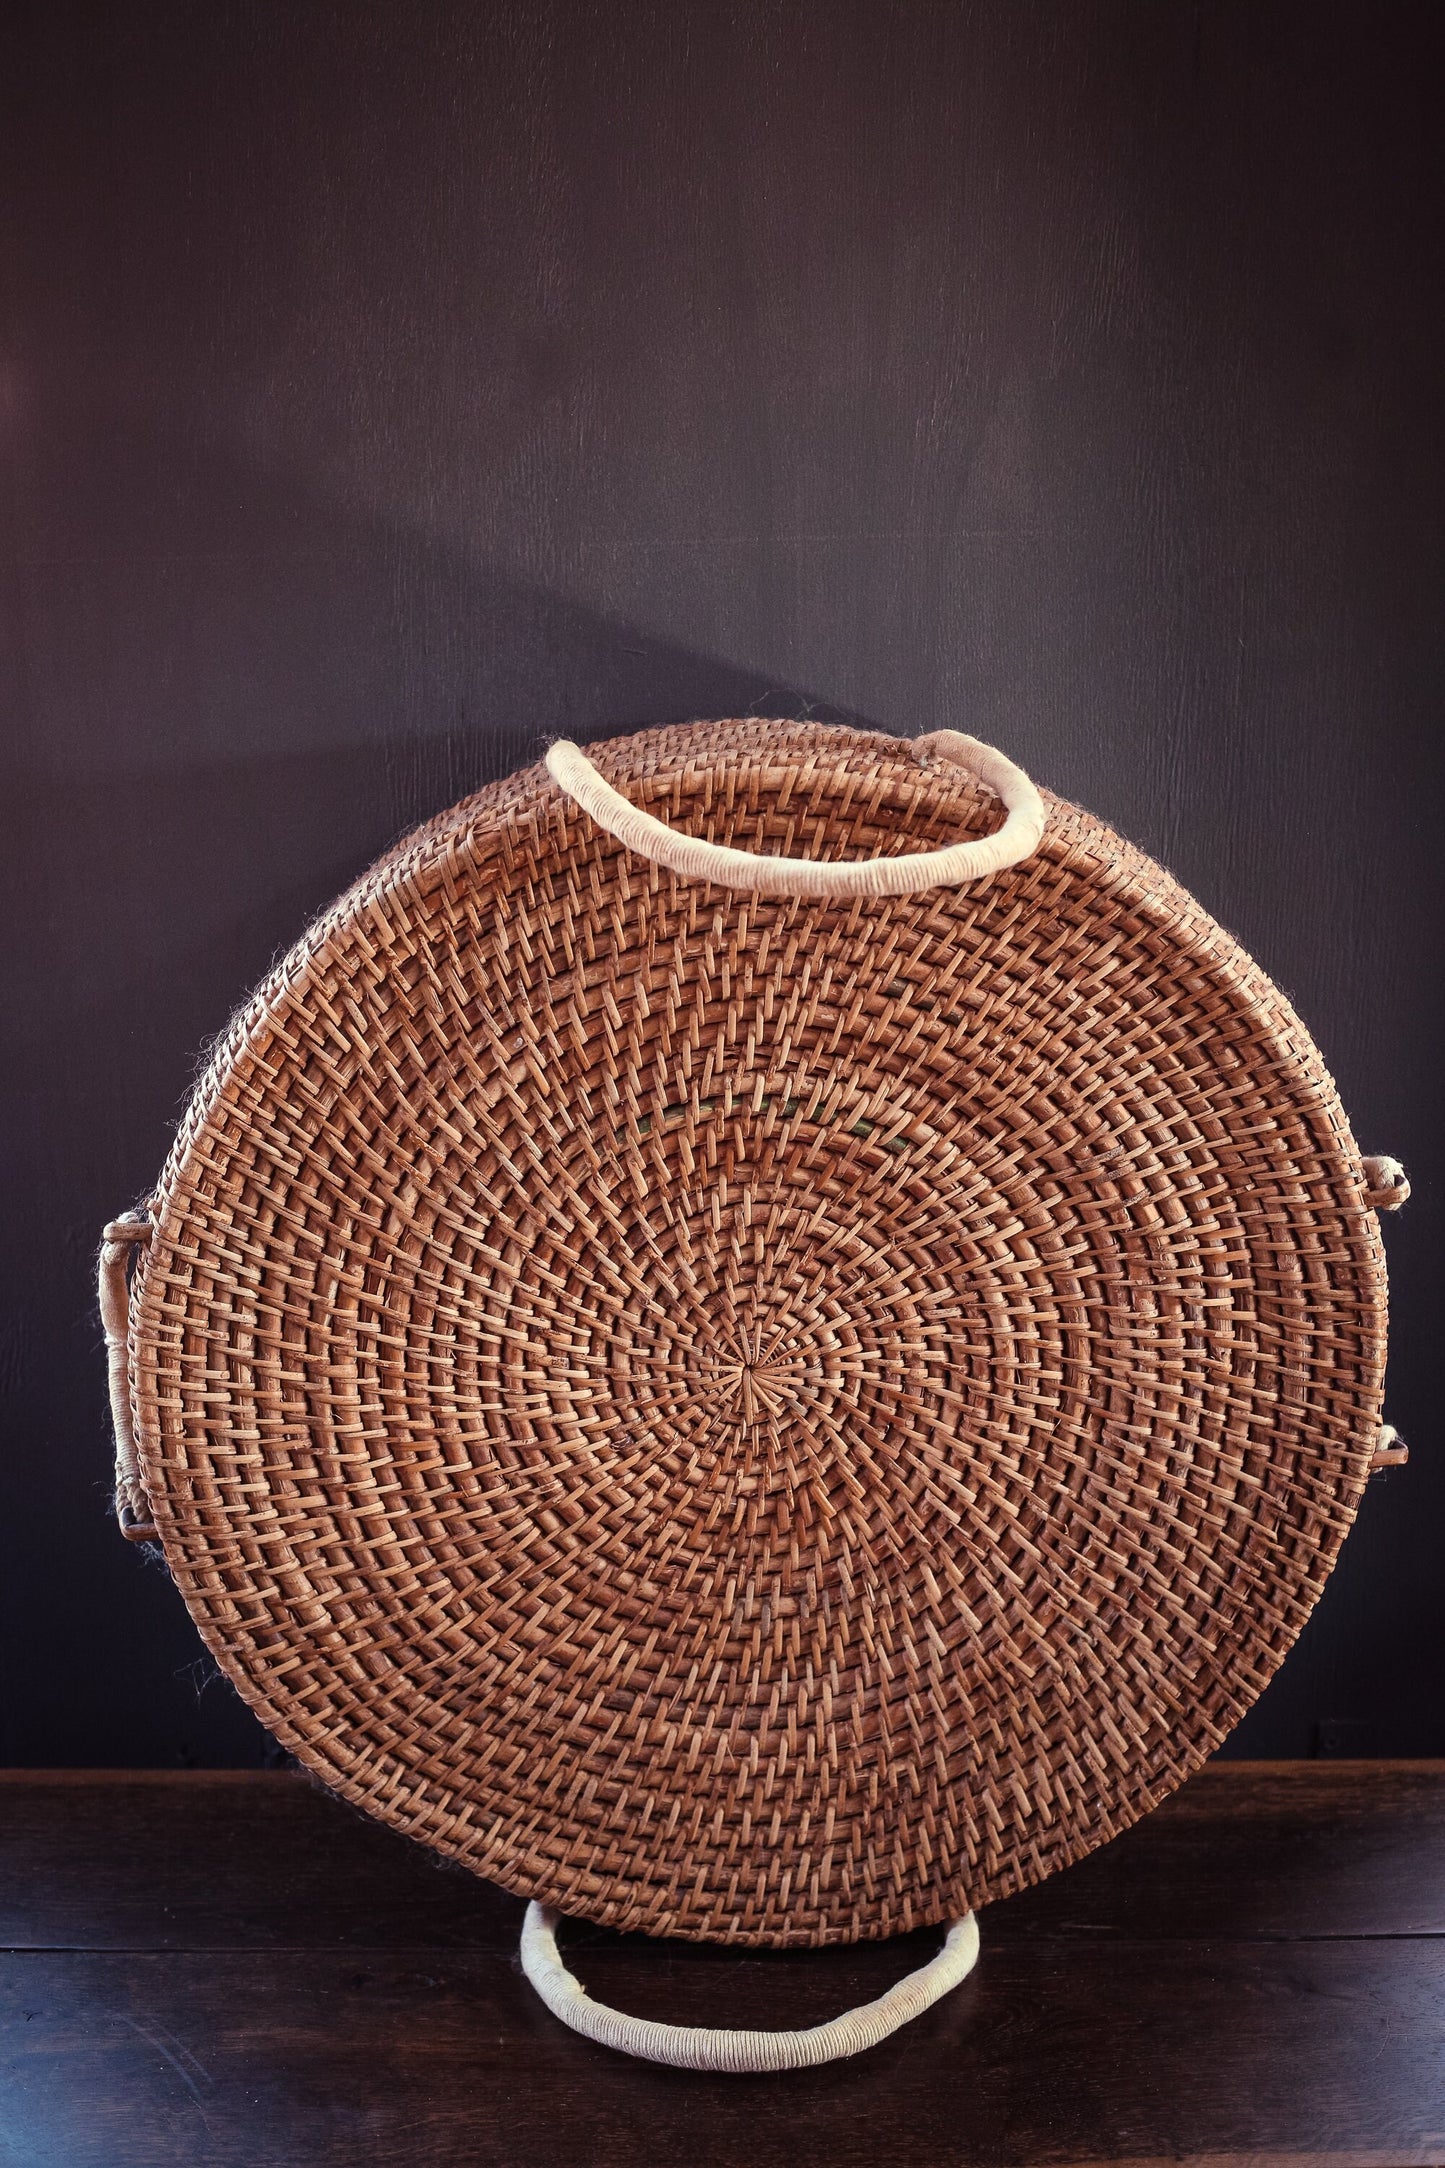 Giant Round Lidded Coil Basket with Rope Handles - Vintage Storage Basket Extra Large Round